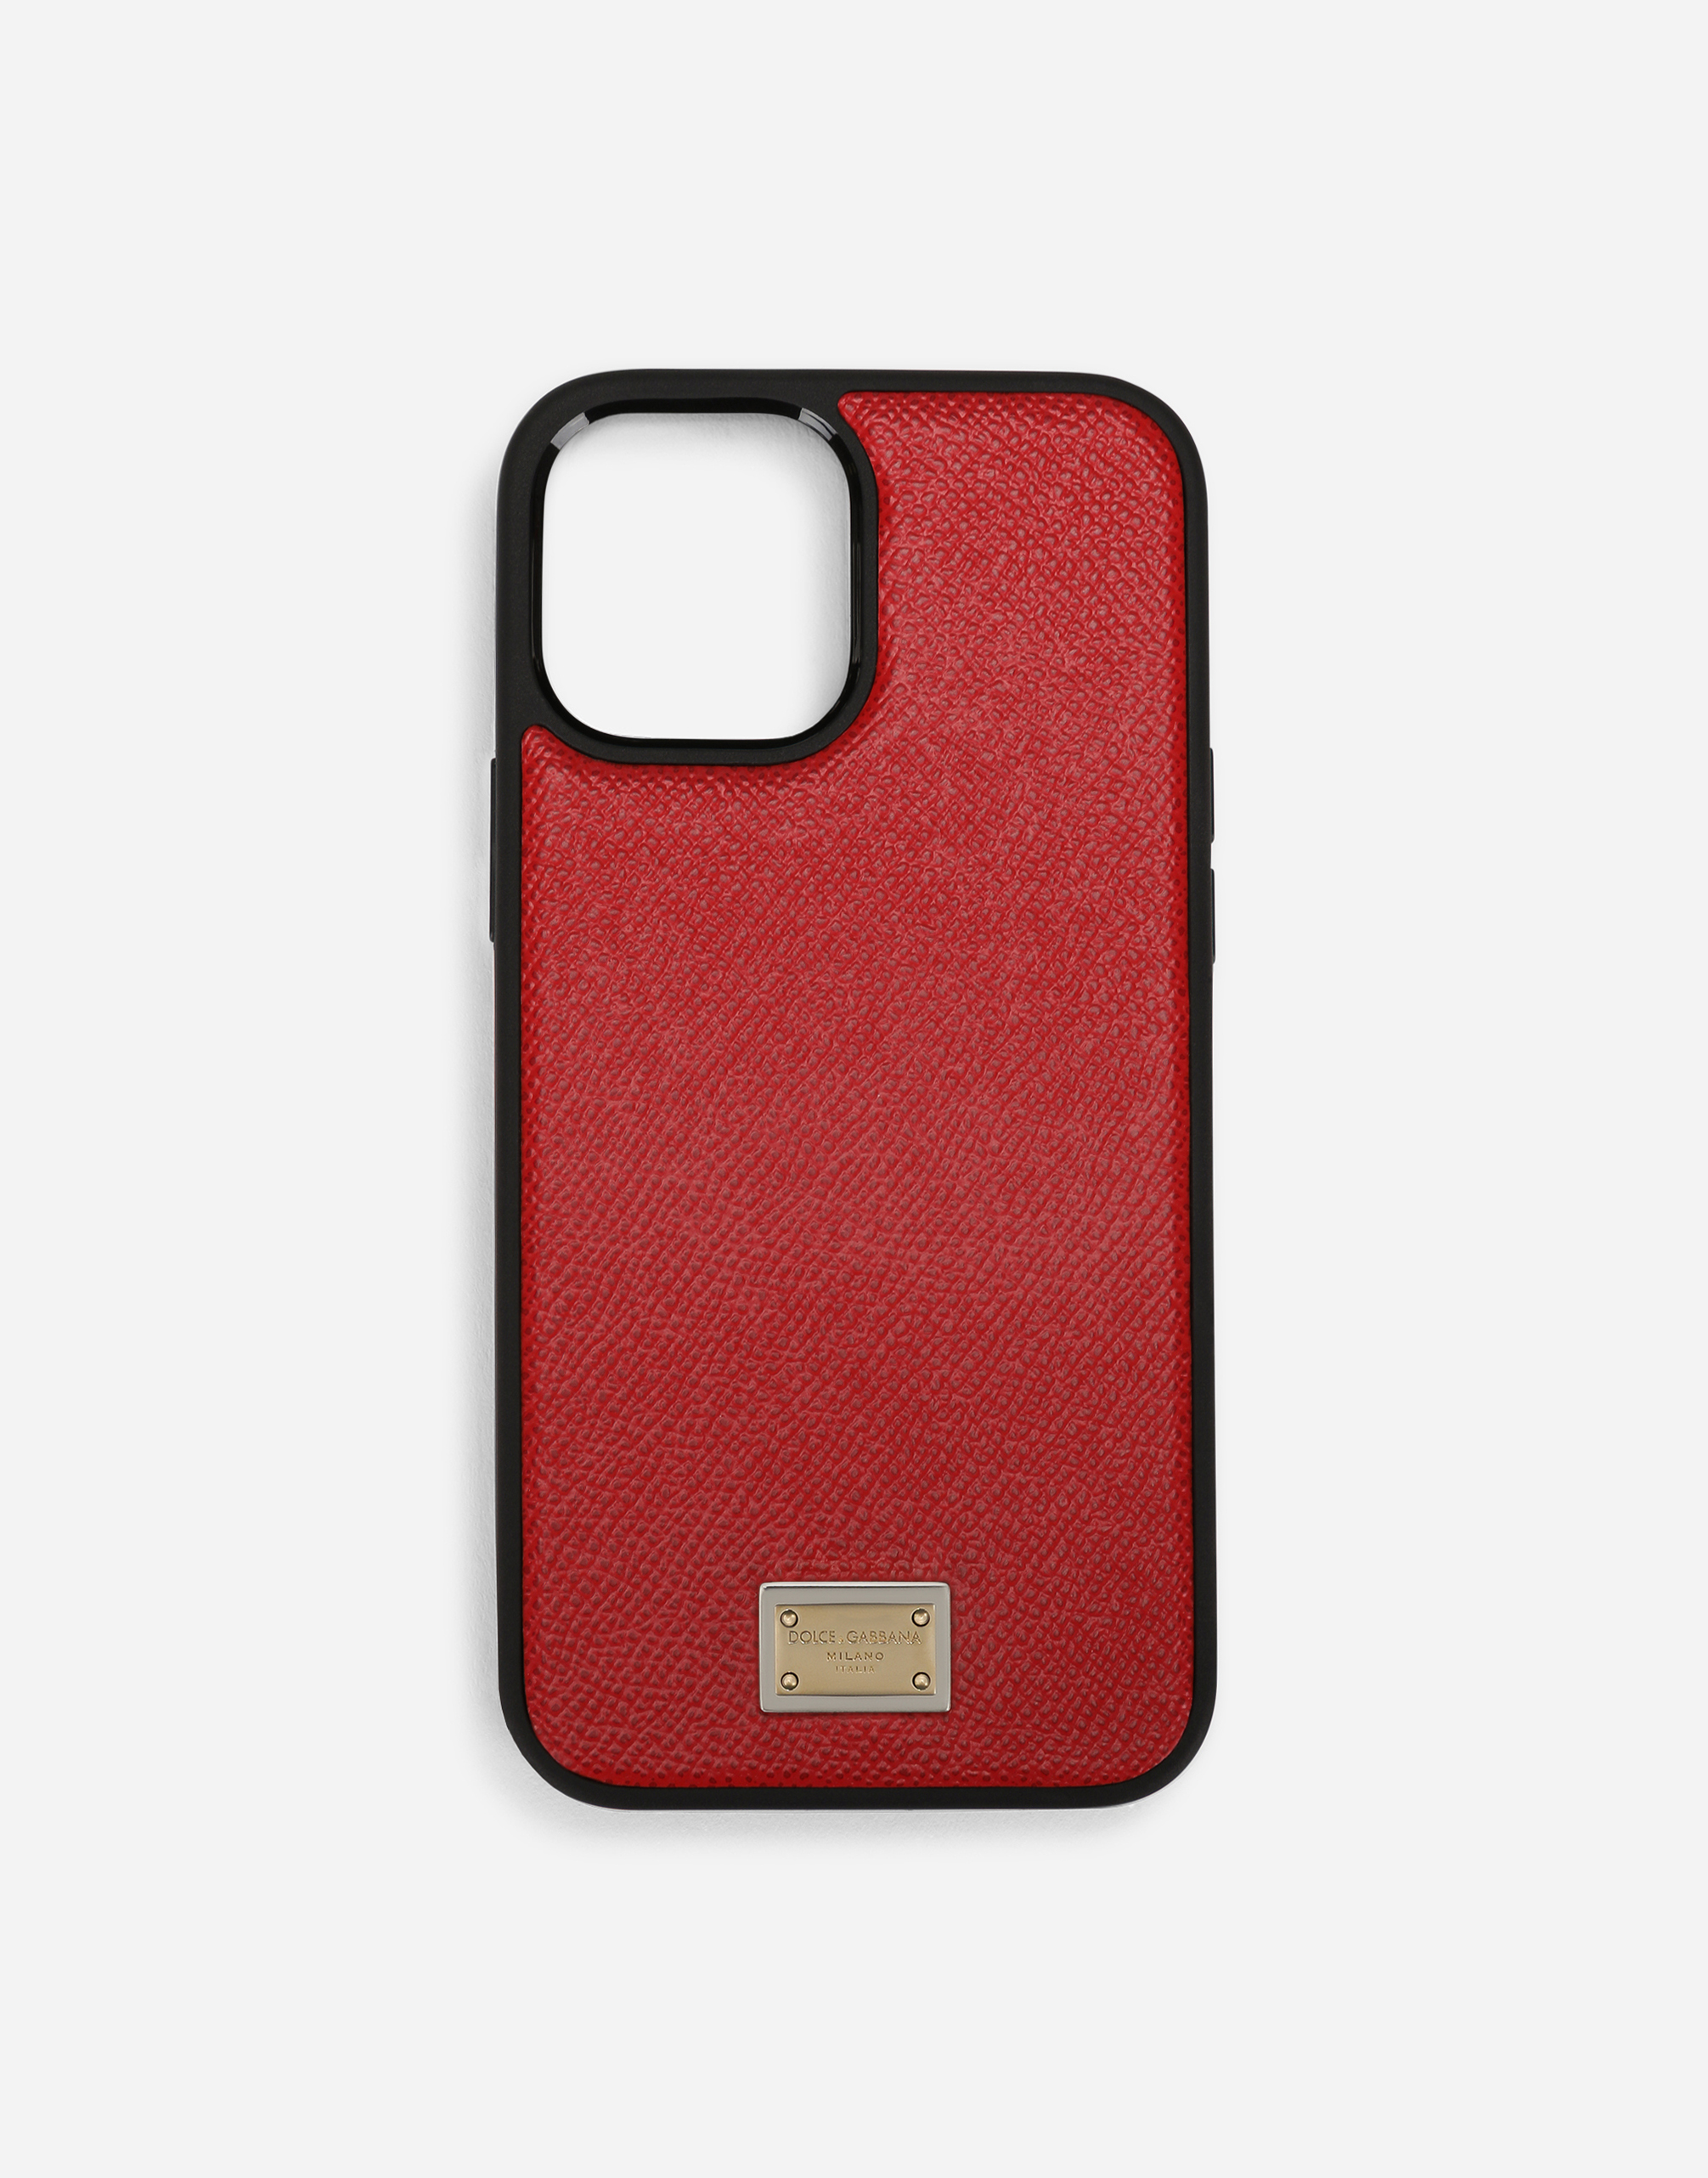 Dauphine calfskin iPhone 12 Pro Max cover with plate in Red